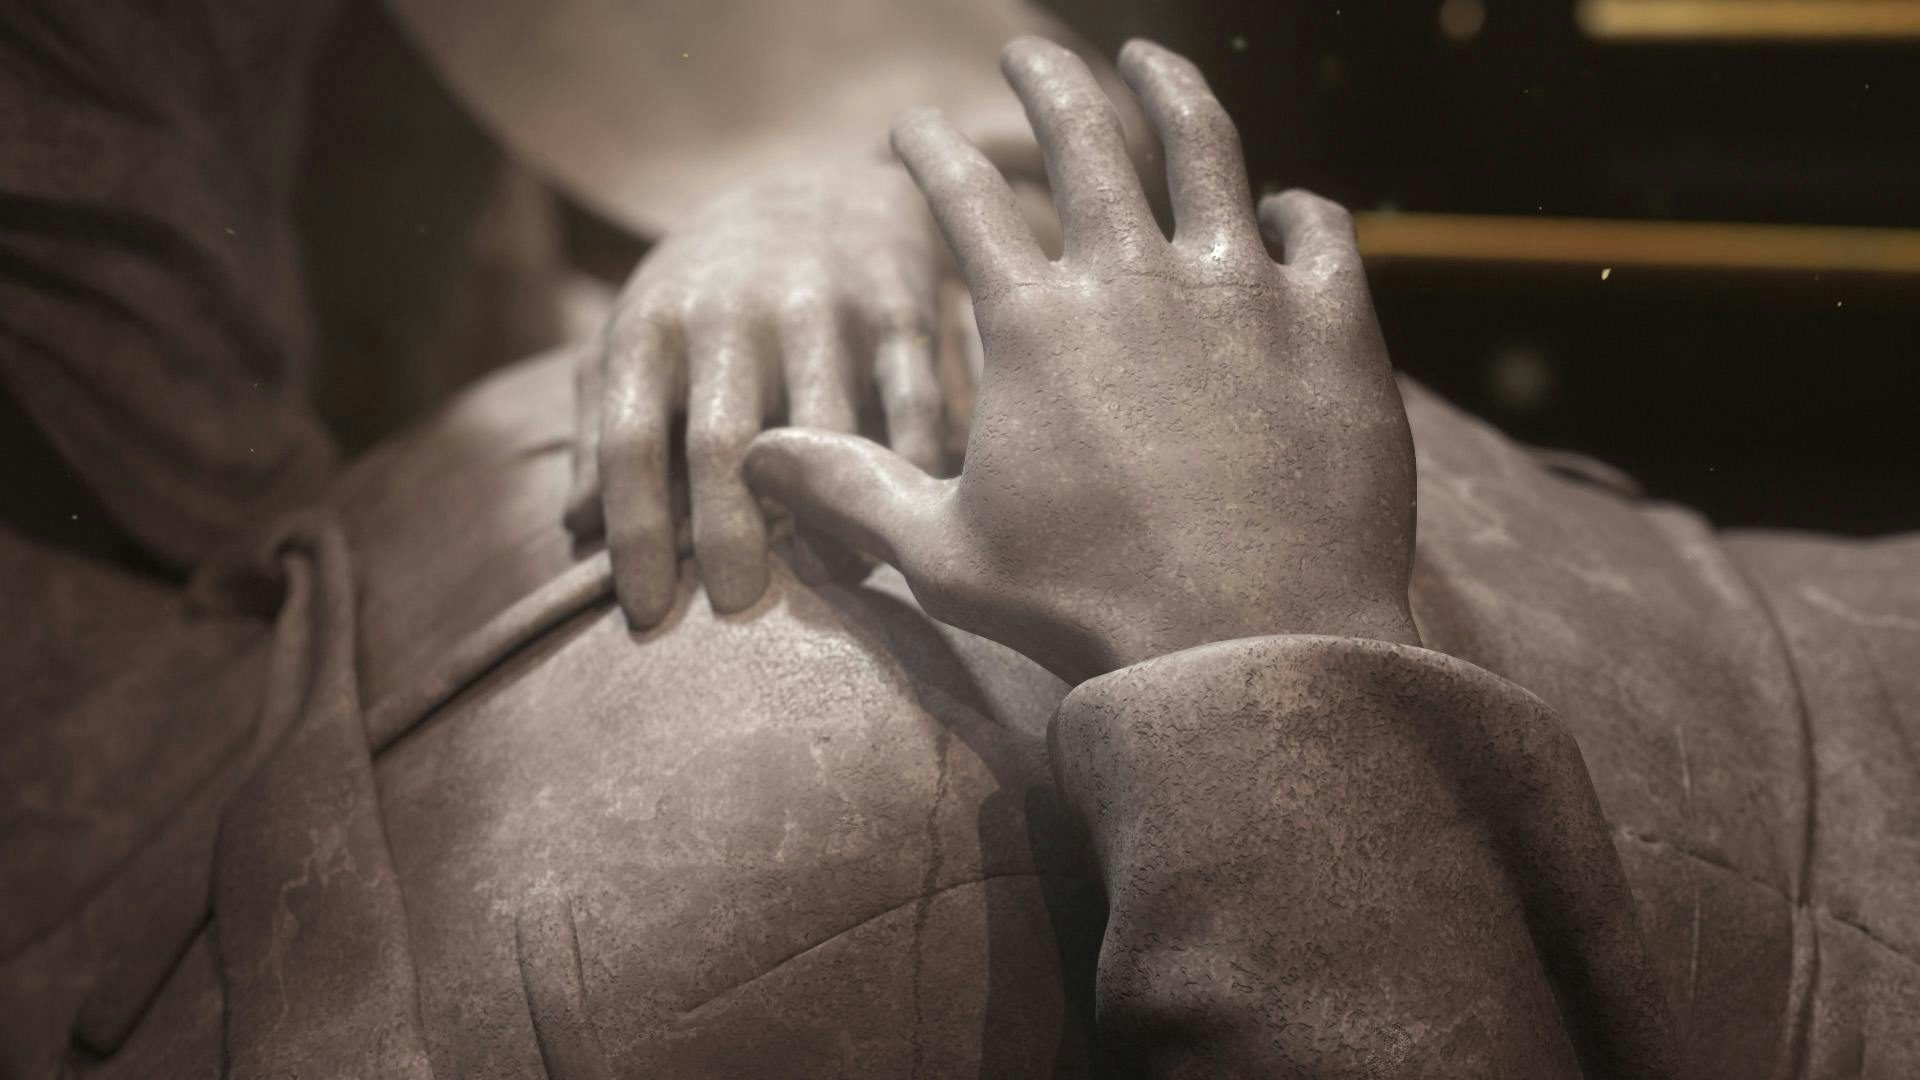 Closeup on the hand of one of the statues